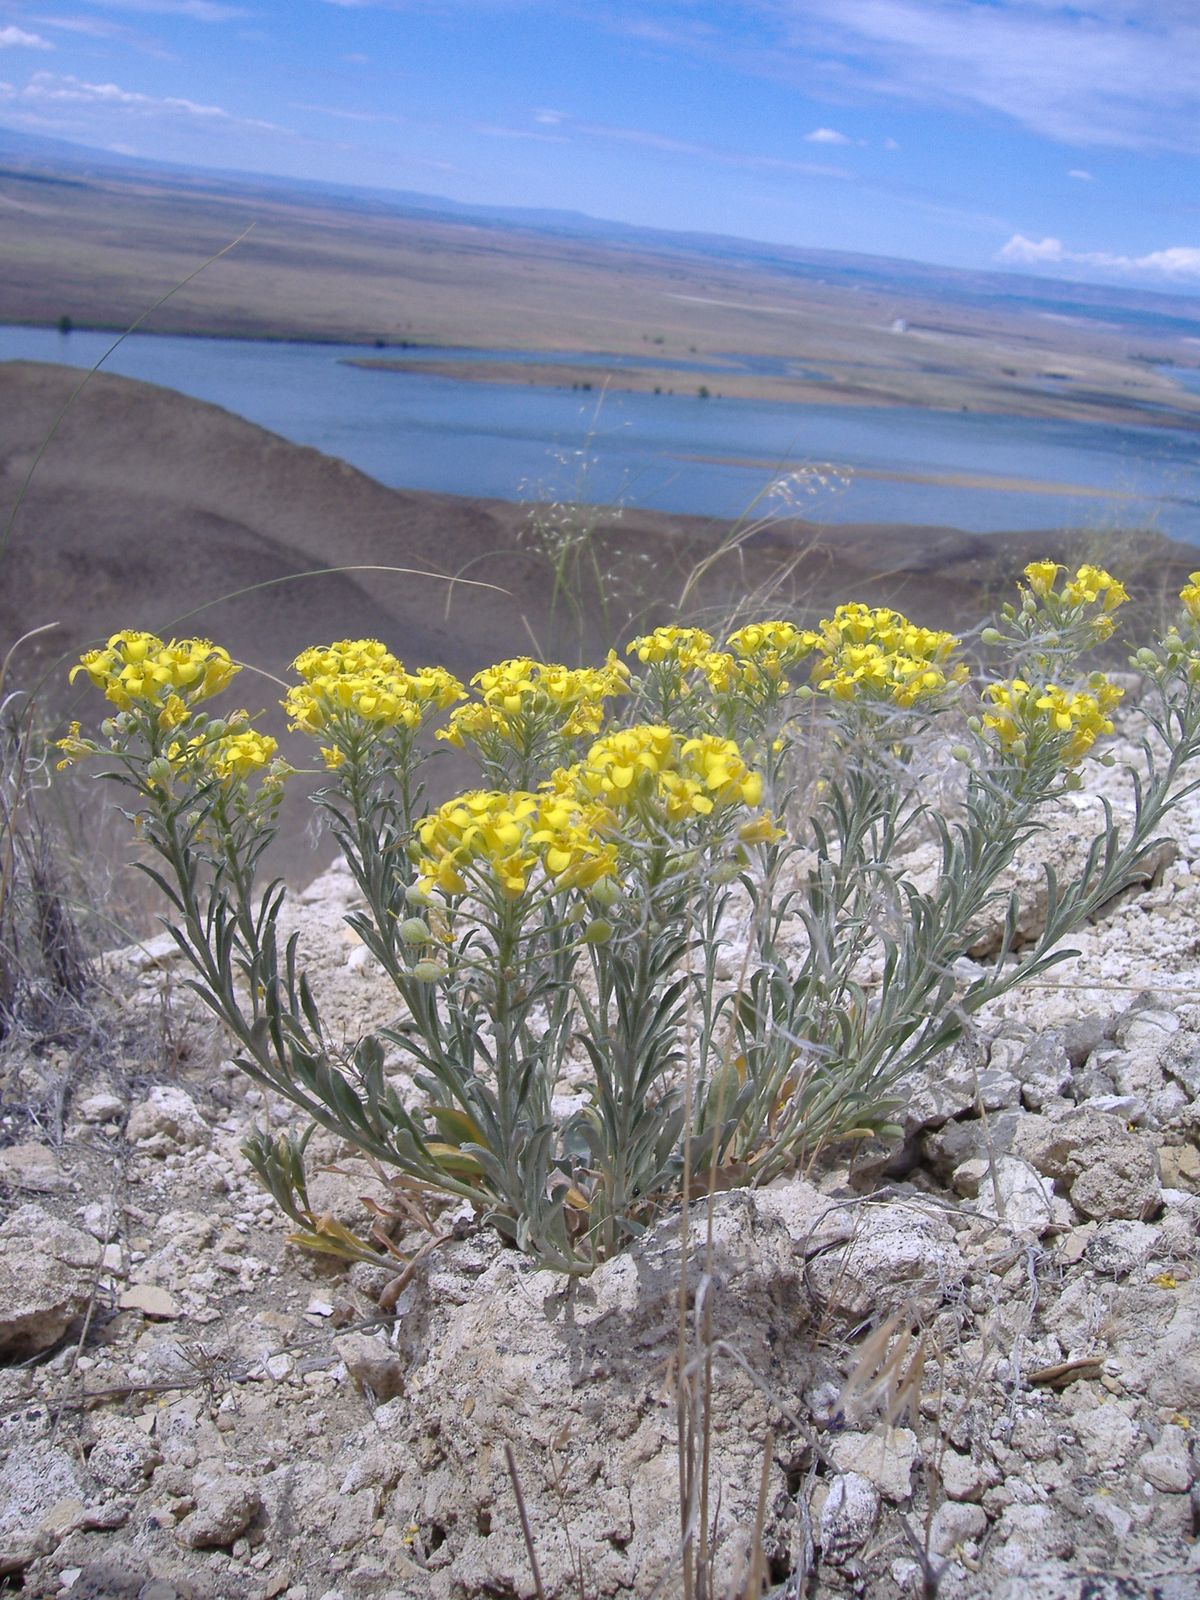 White Bluffs bladderpod, are found primarily on federal lands, occupying cliffs overlooking the Hanford Reach of the Columbia River. The species was recommended for Endangered Species Act protections in May 2012. (U.S. Fish and Wildlife Service)